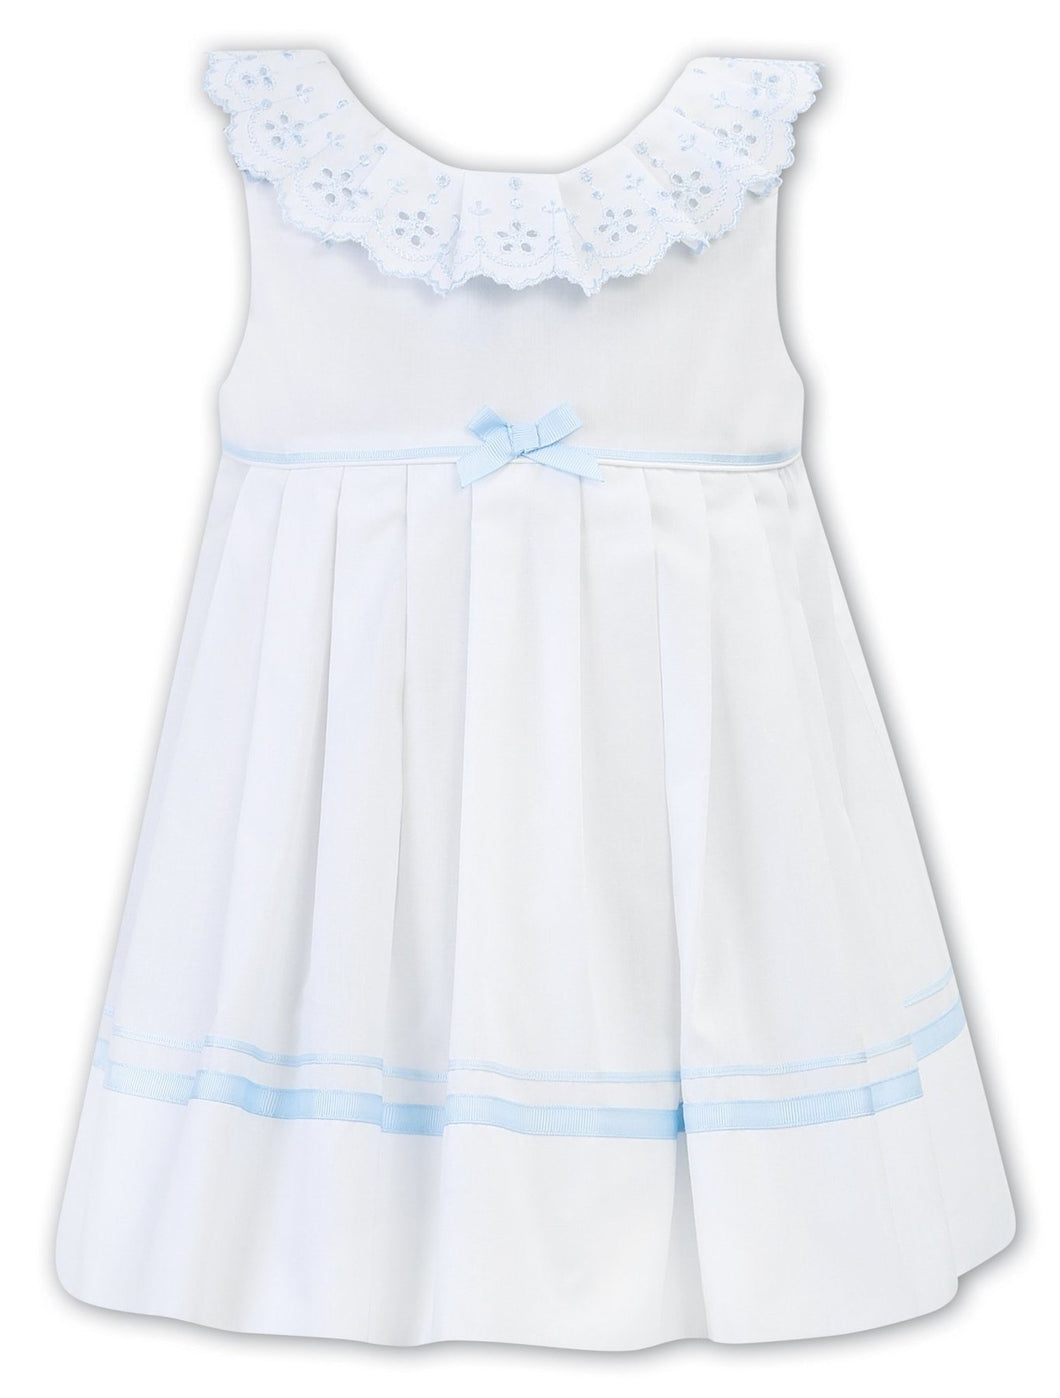 Girls Sleeveless Dress with Embroidered Detailed Frilled Collar, Ribbon and Bow Trim Detail on Waist and Hemline, V Back